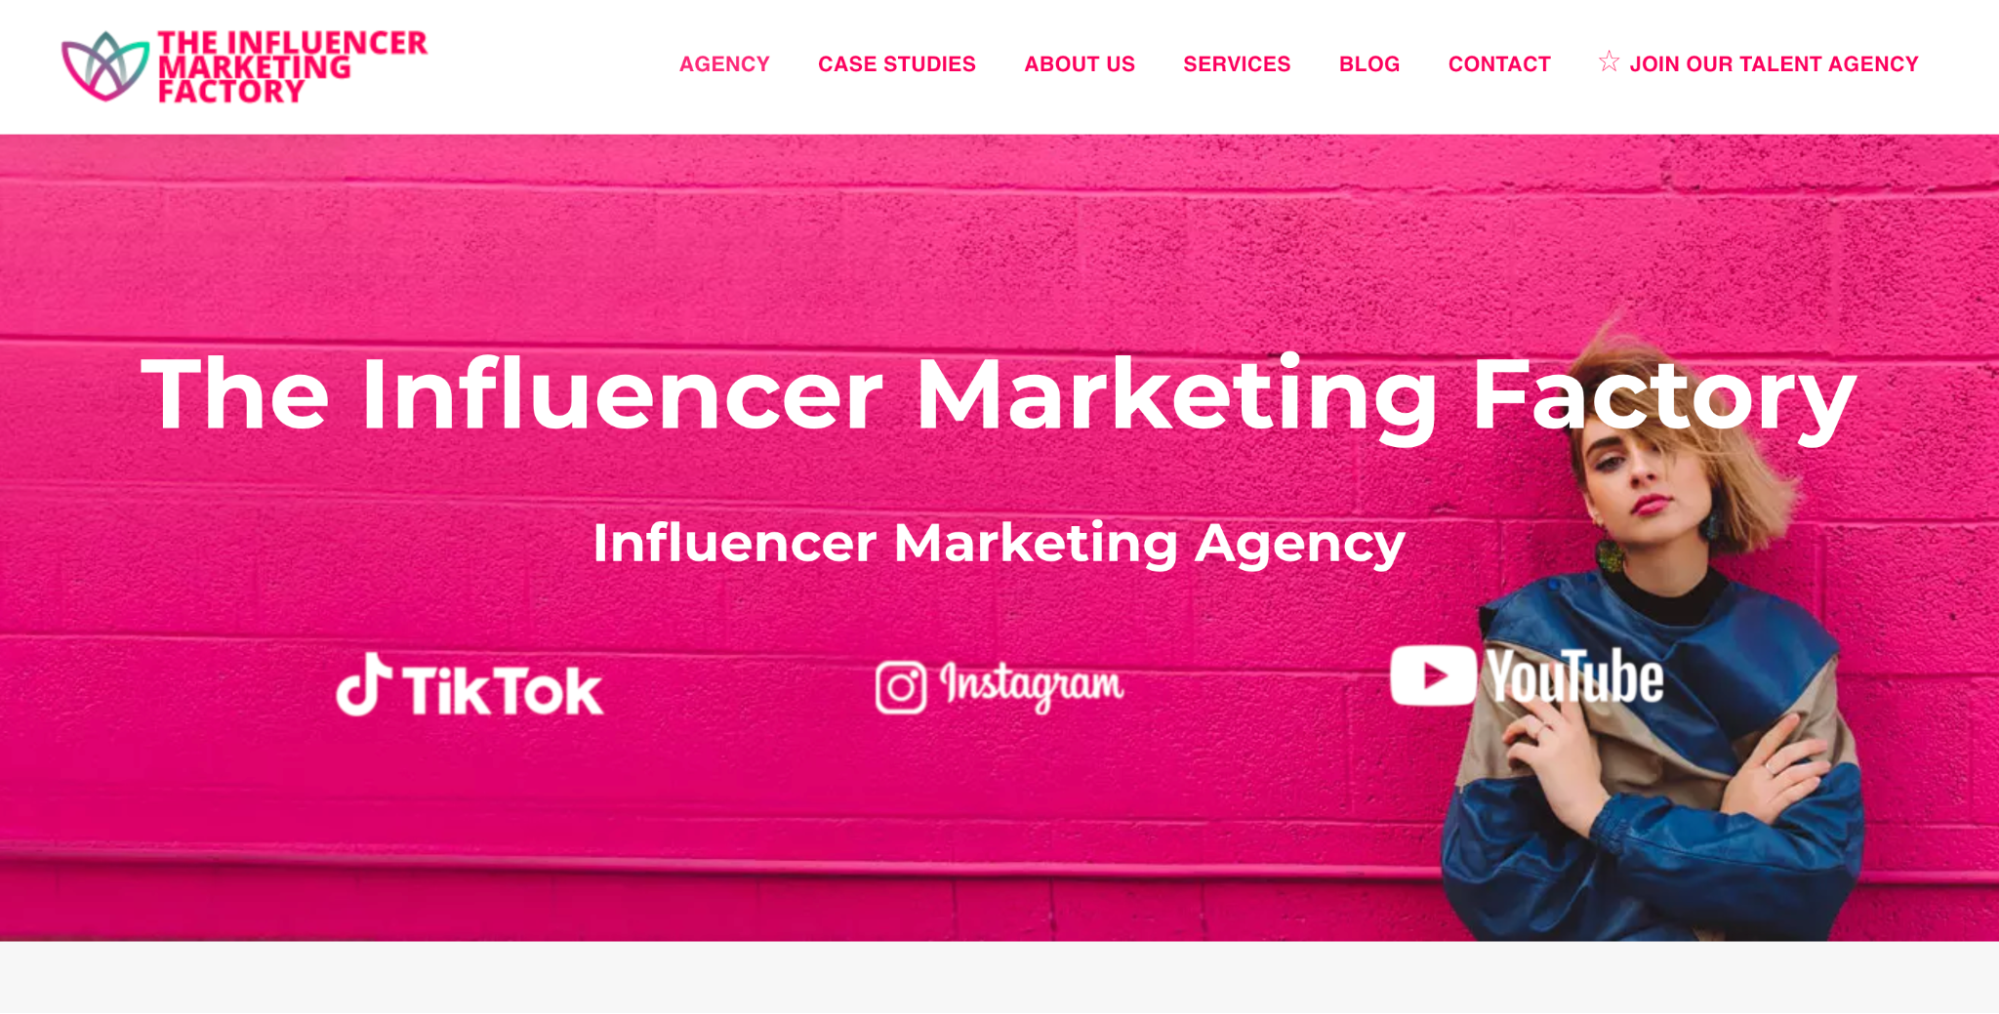 The Influencer Marketing Factory